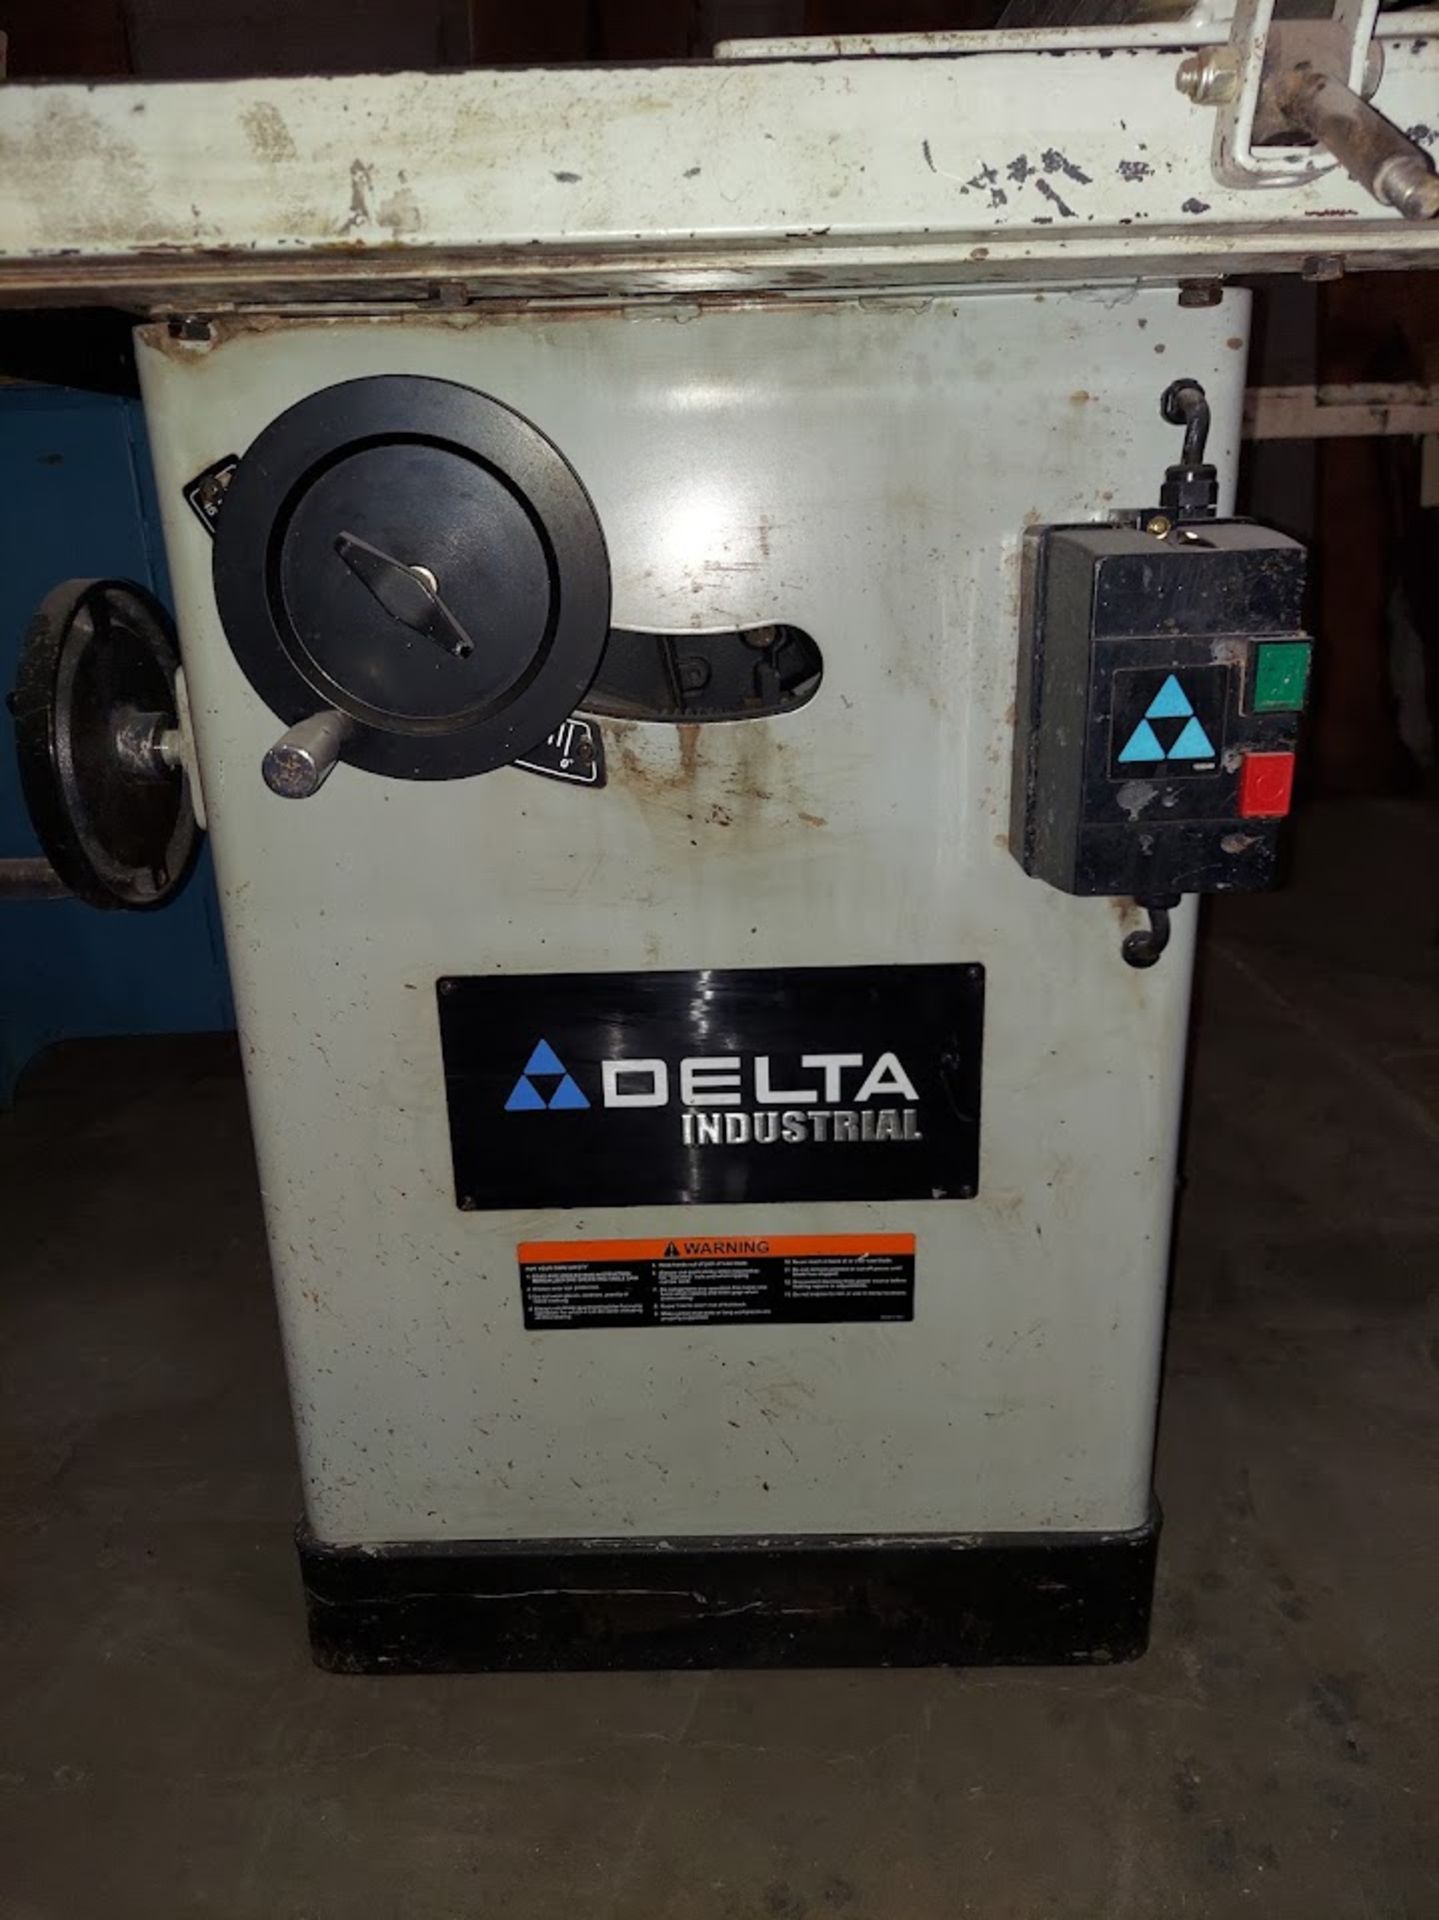 Delta Industrial 10" Cabinet Table Saw, Model #36-729, T-Square Fence & 51" Rail, Motor is 15 Amp - Image 2 of 3